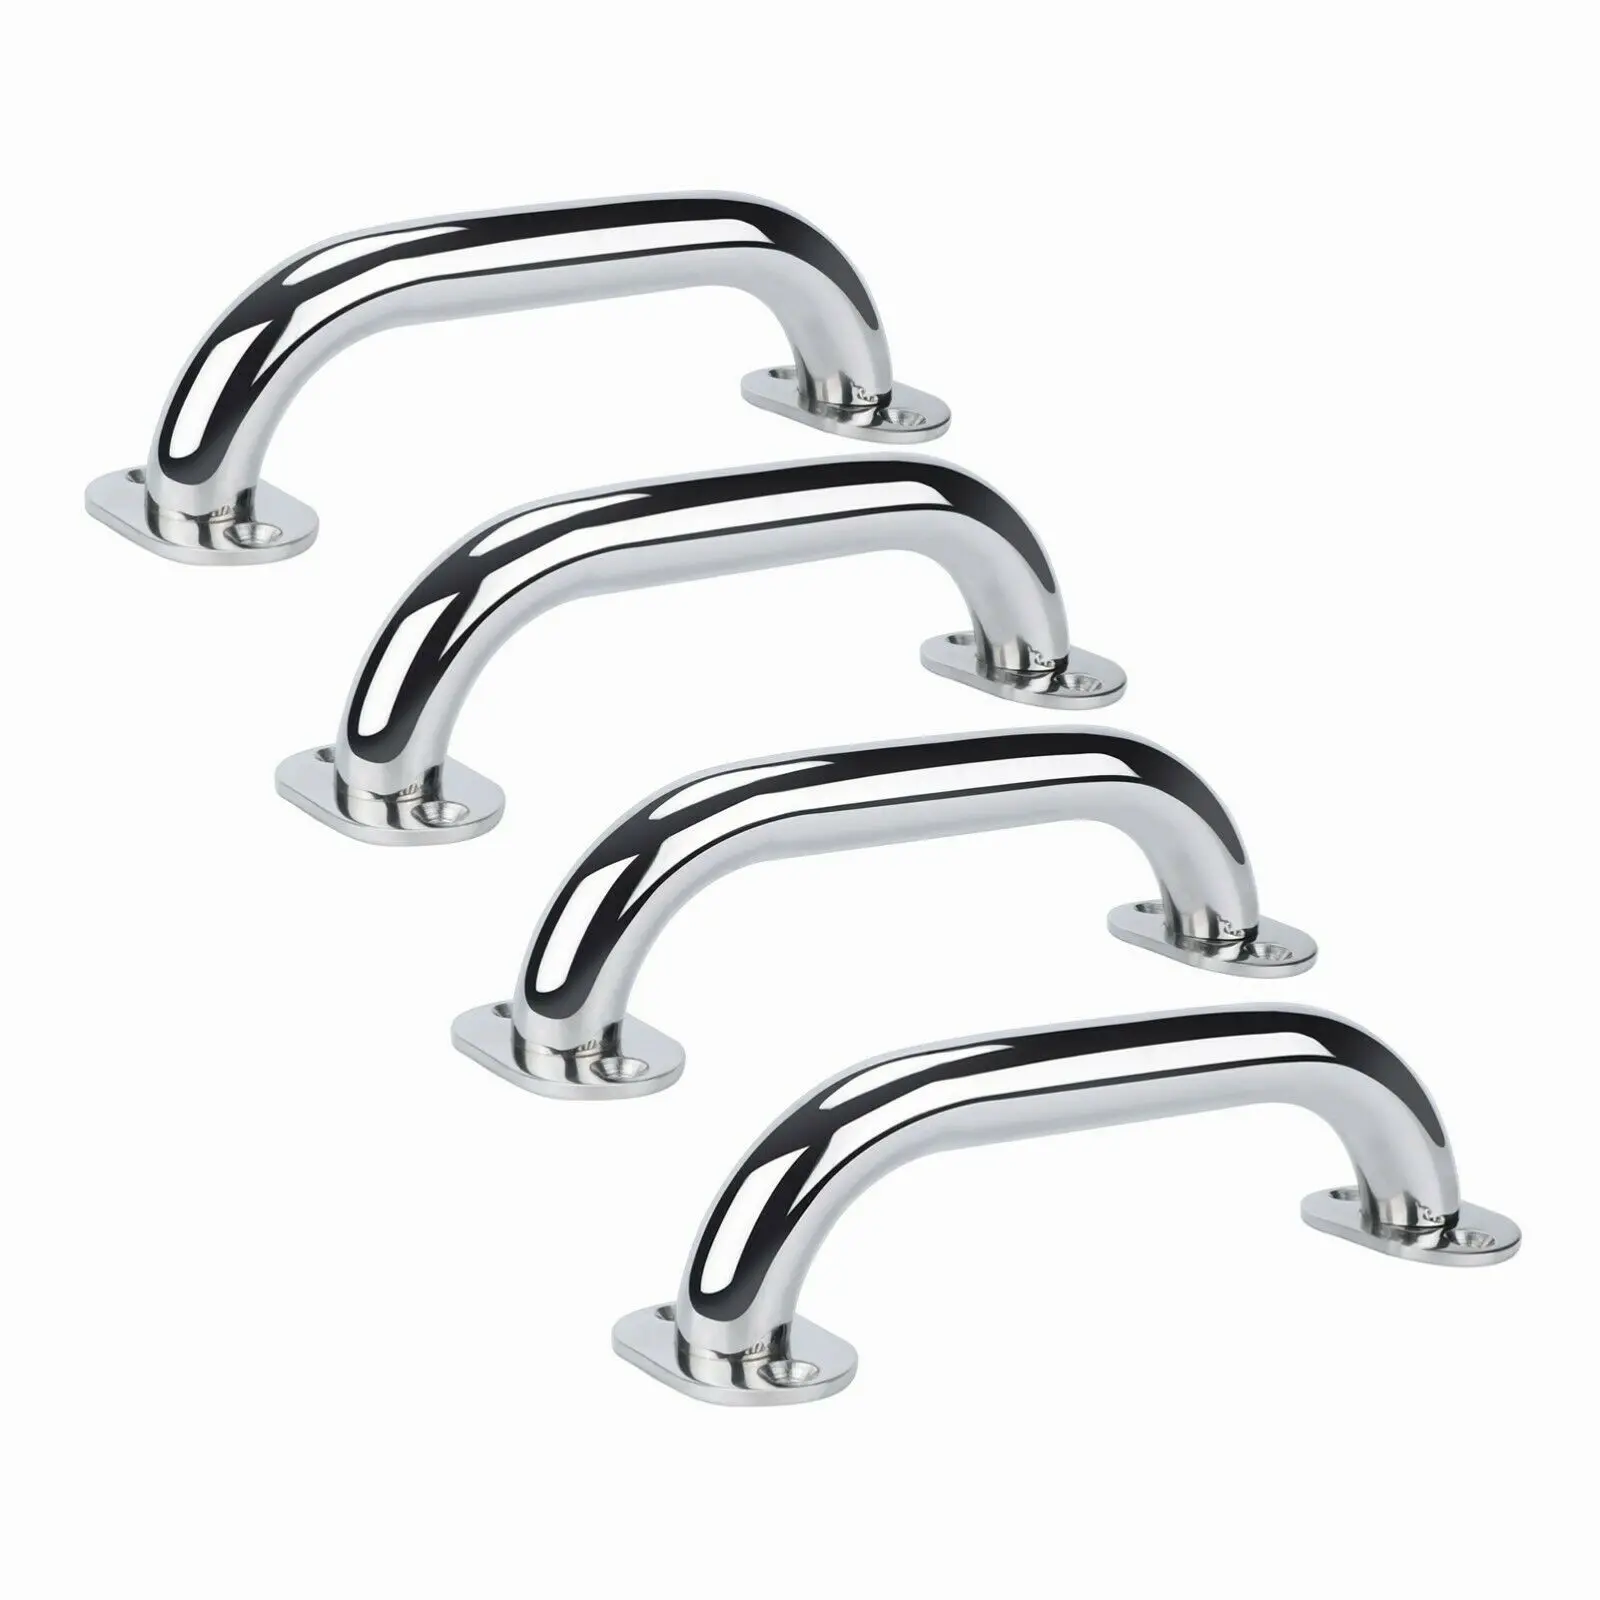 Door Handle 4 Pieces Stainless steel 9'' Boat Polished Boat Marine Grab Handle Handrail Boat Accessories cabinet door handles closet handles 10 piece set of polished cabinet knobs for easy dresser wardrobe hardware installation